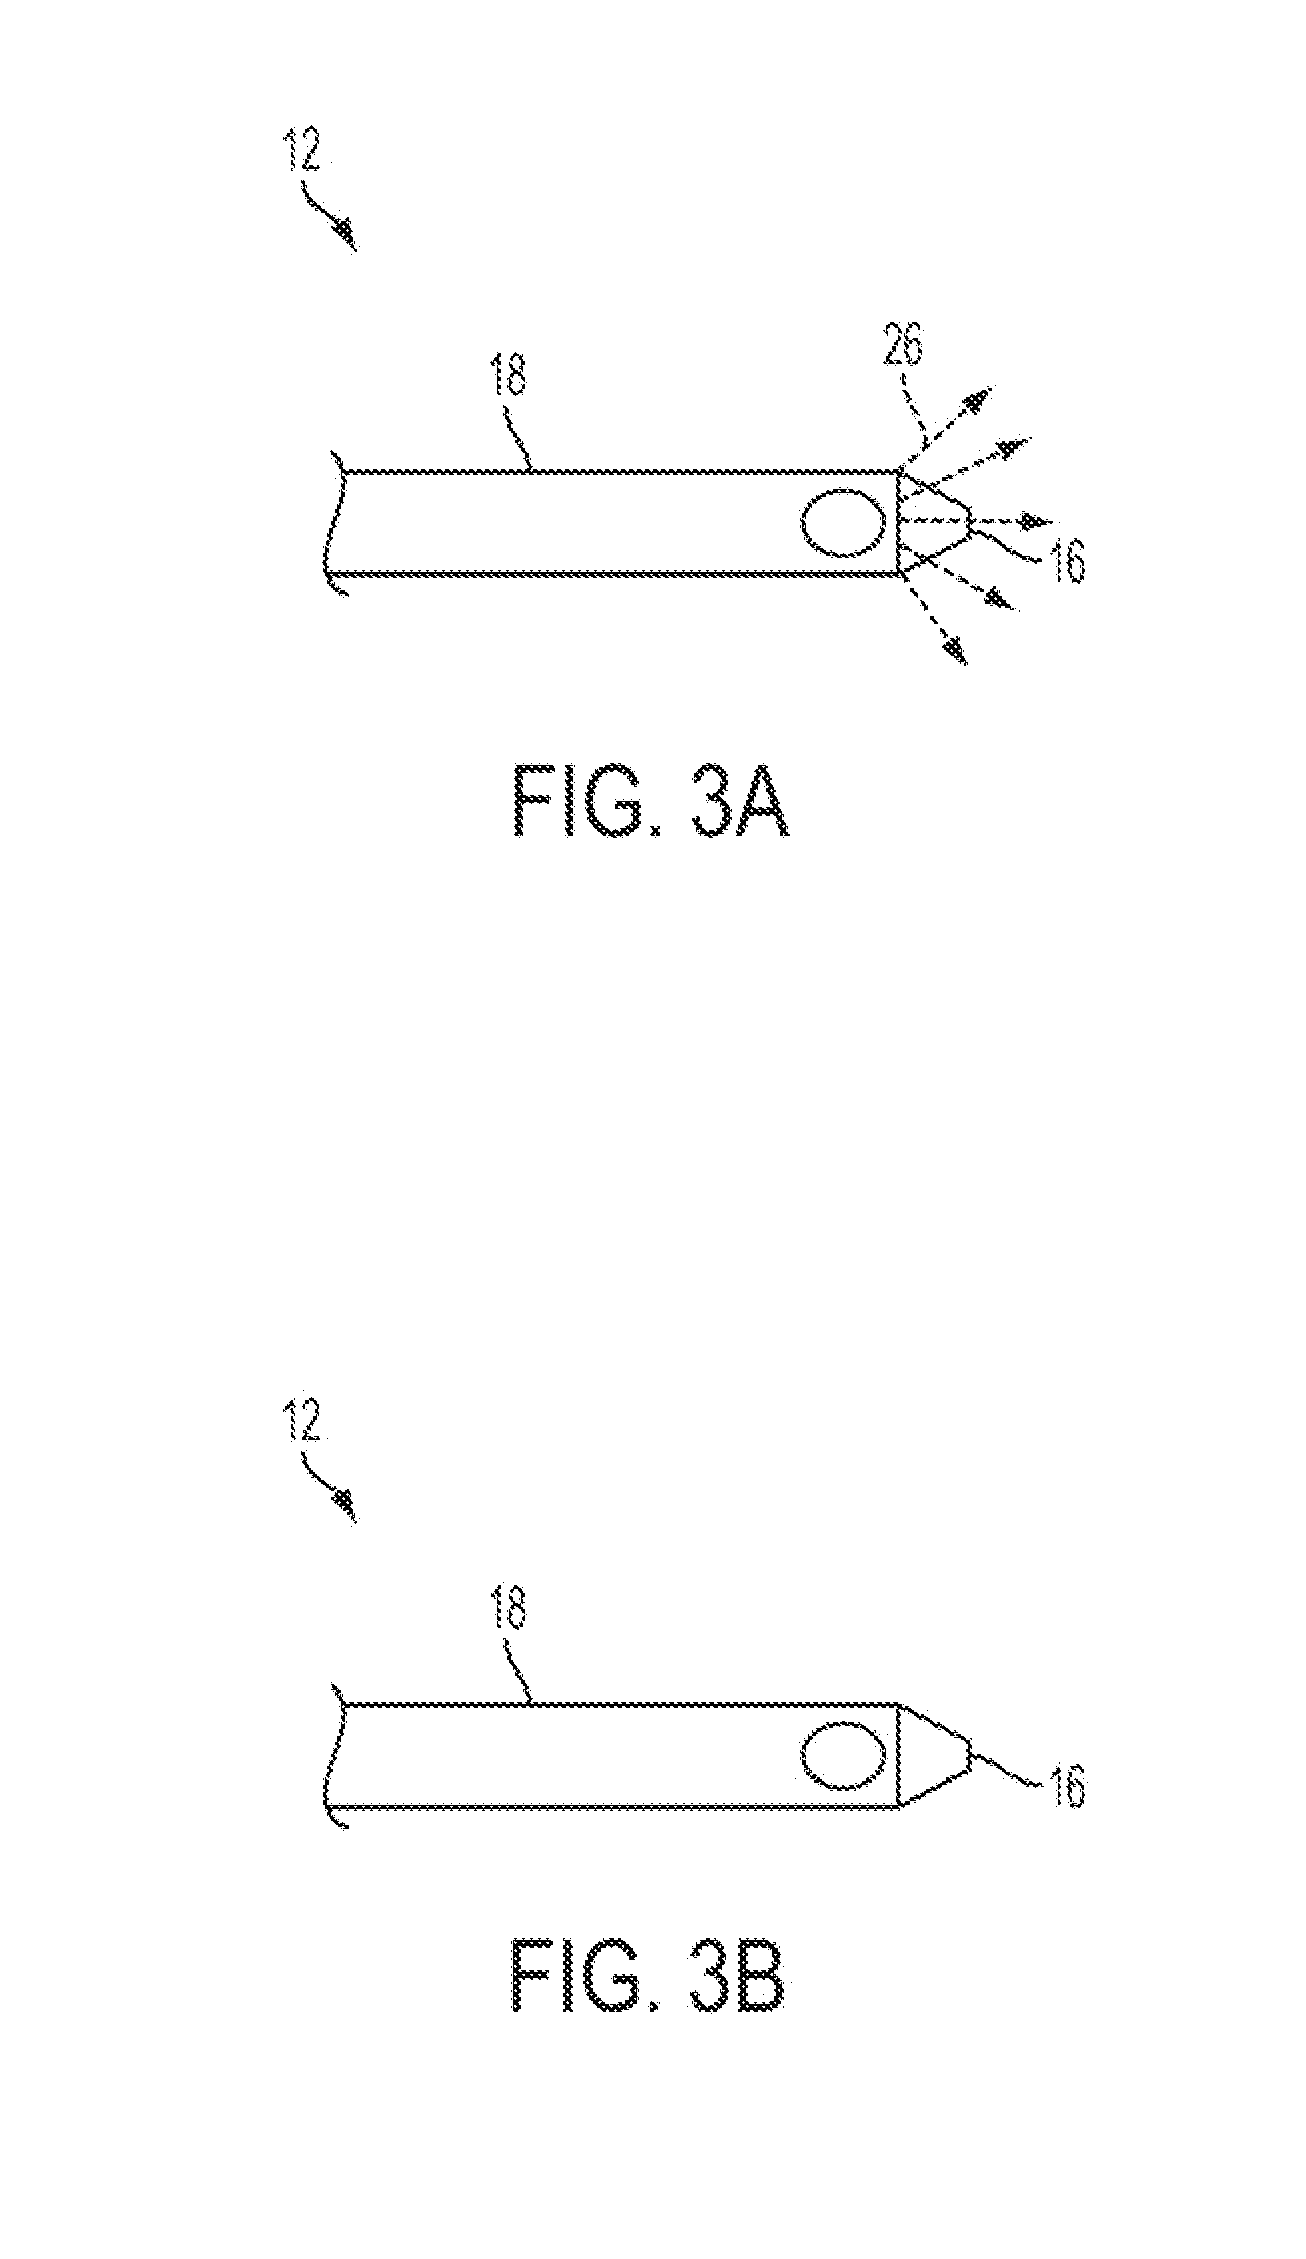 Vitreous Cutter Sleeve and a Vitreous Cutter System Using the Same